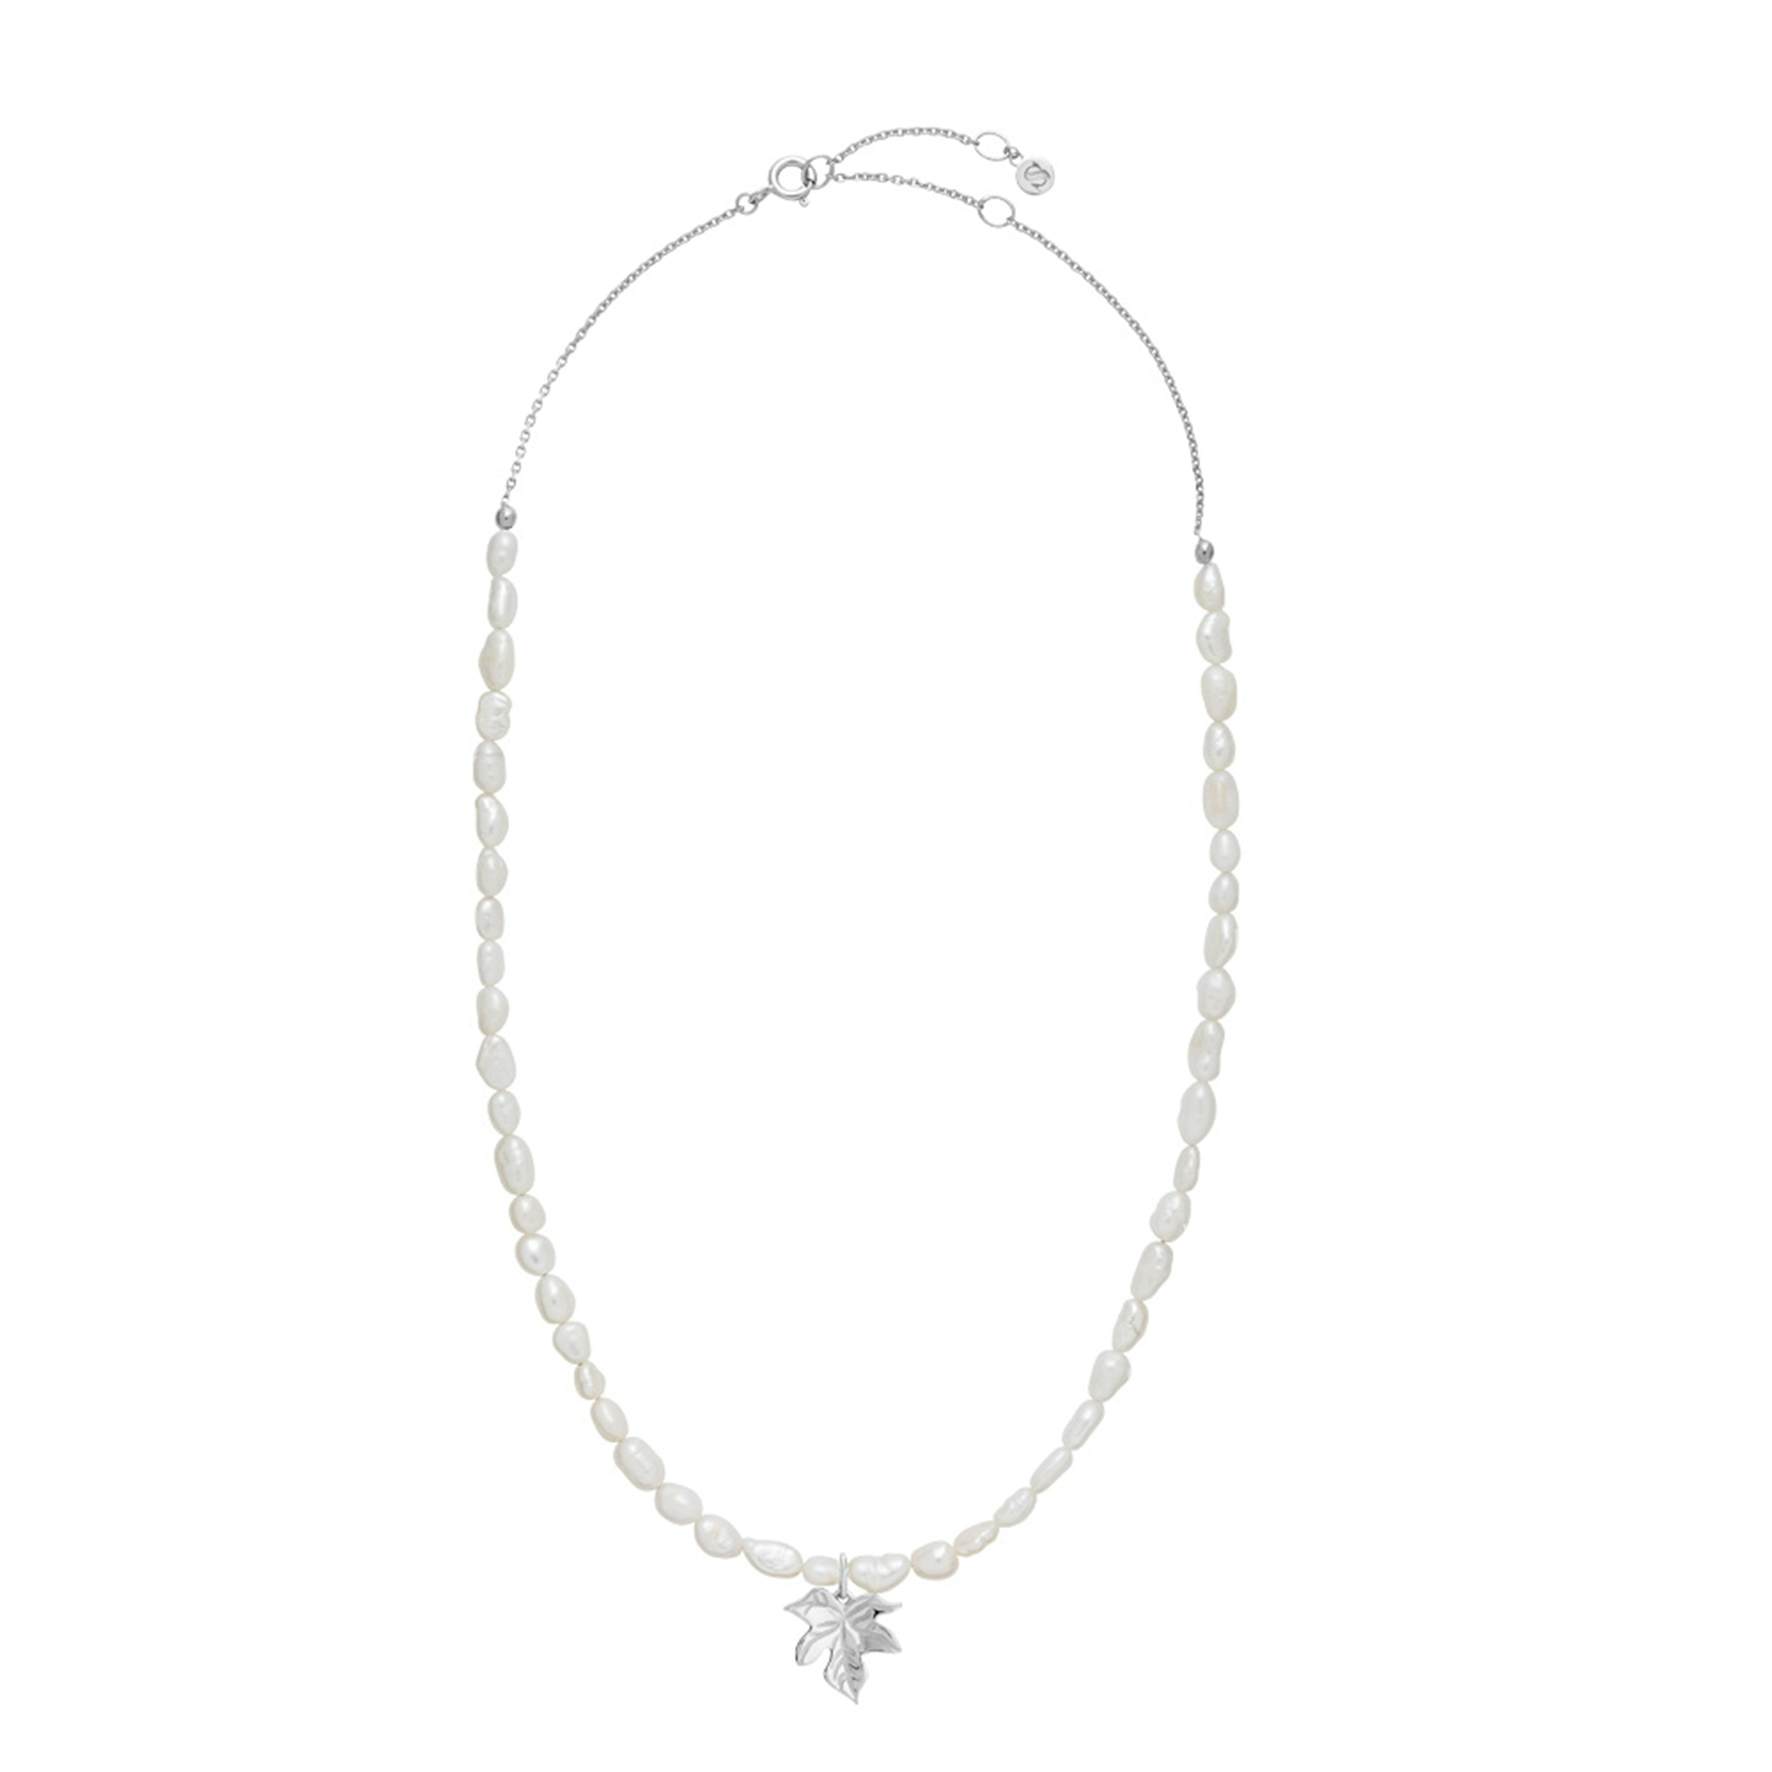 Caley Pearl Necklace from Izabel Camille in Silver Sterling 925